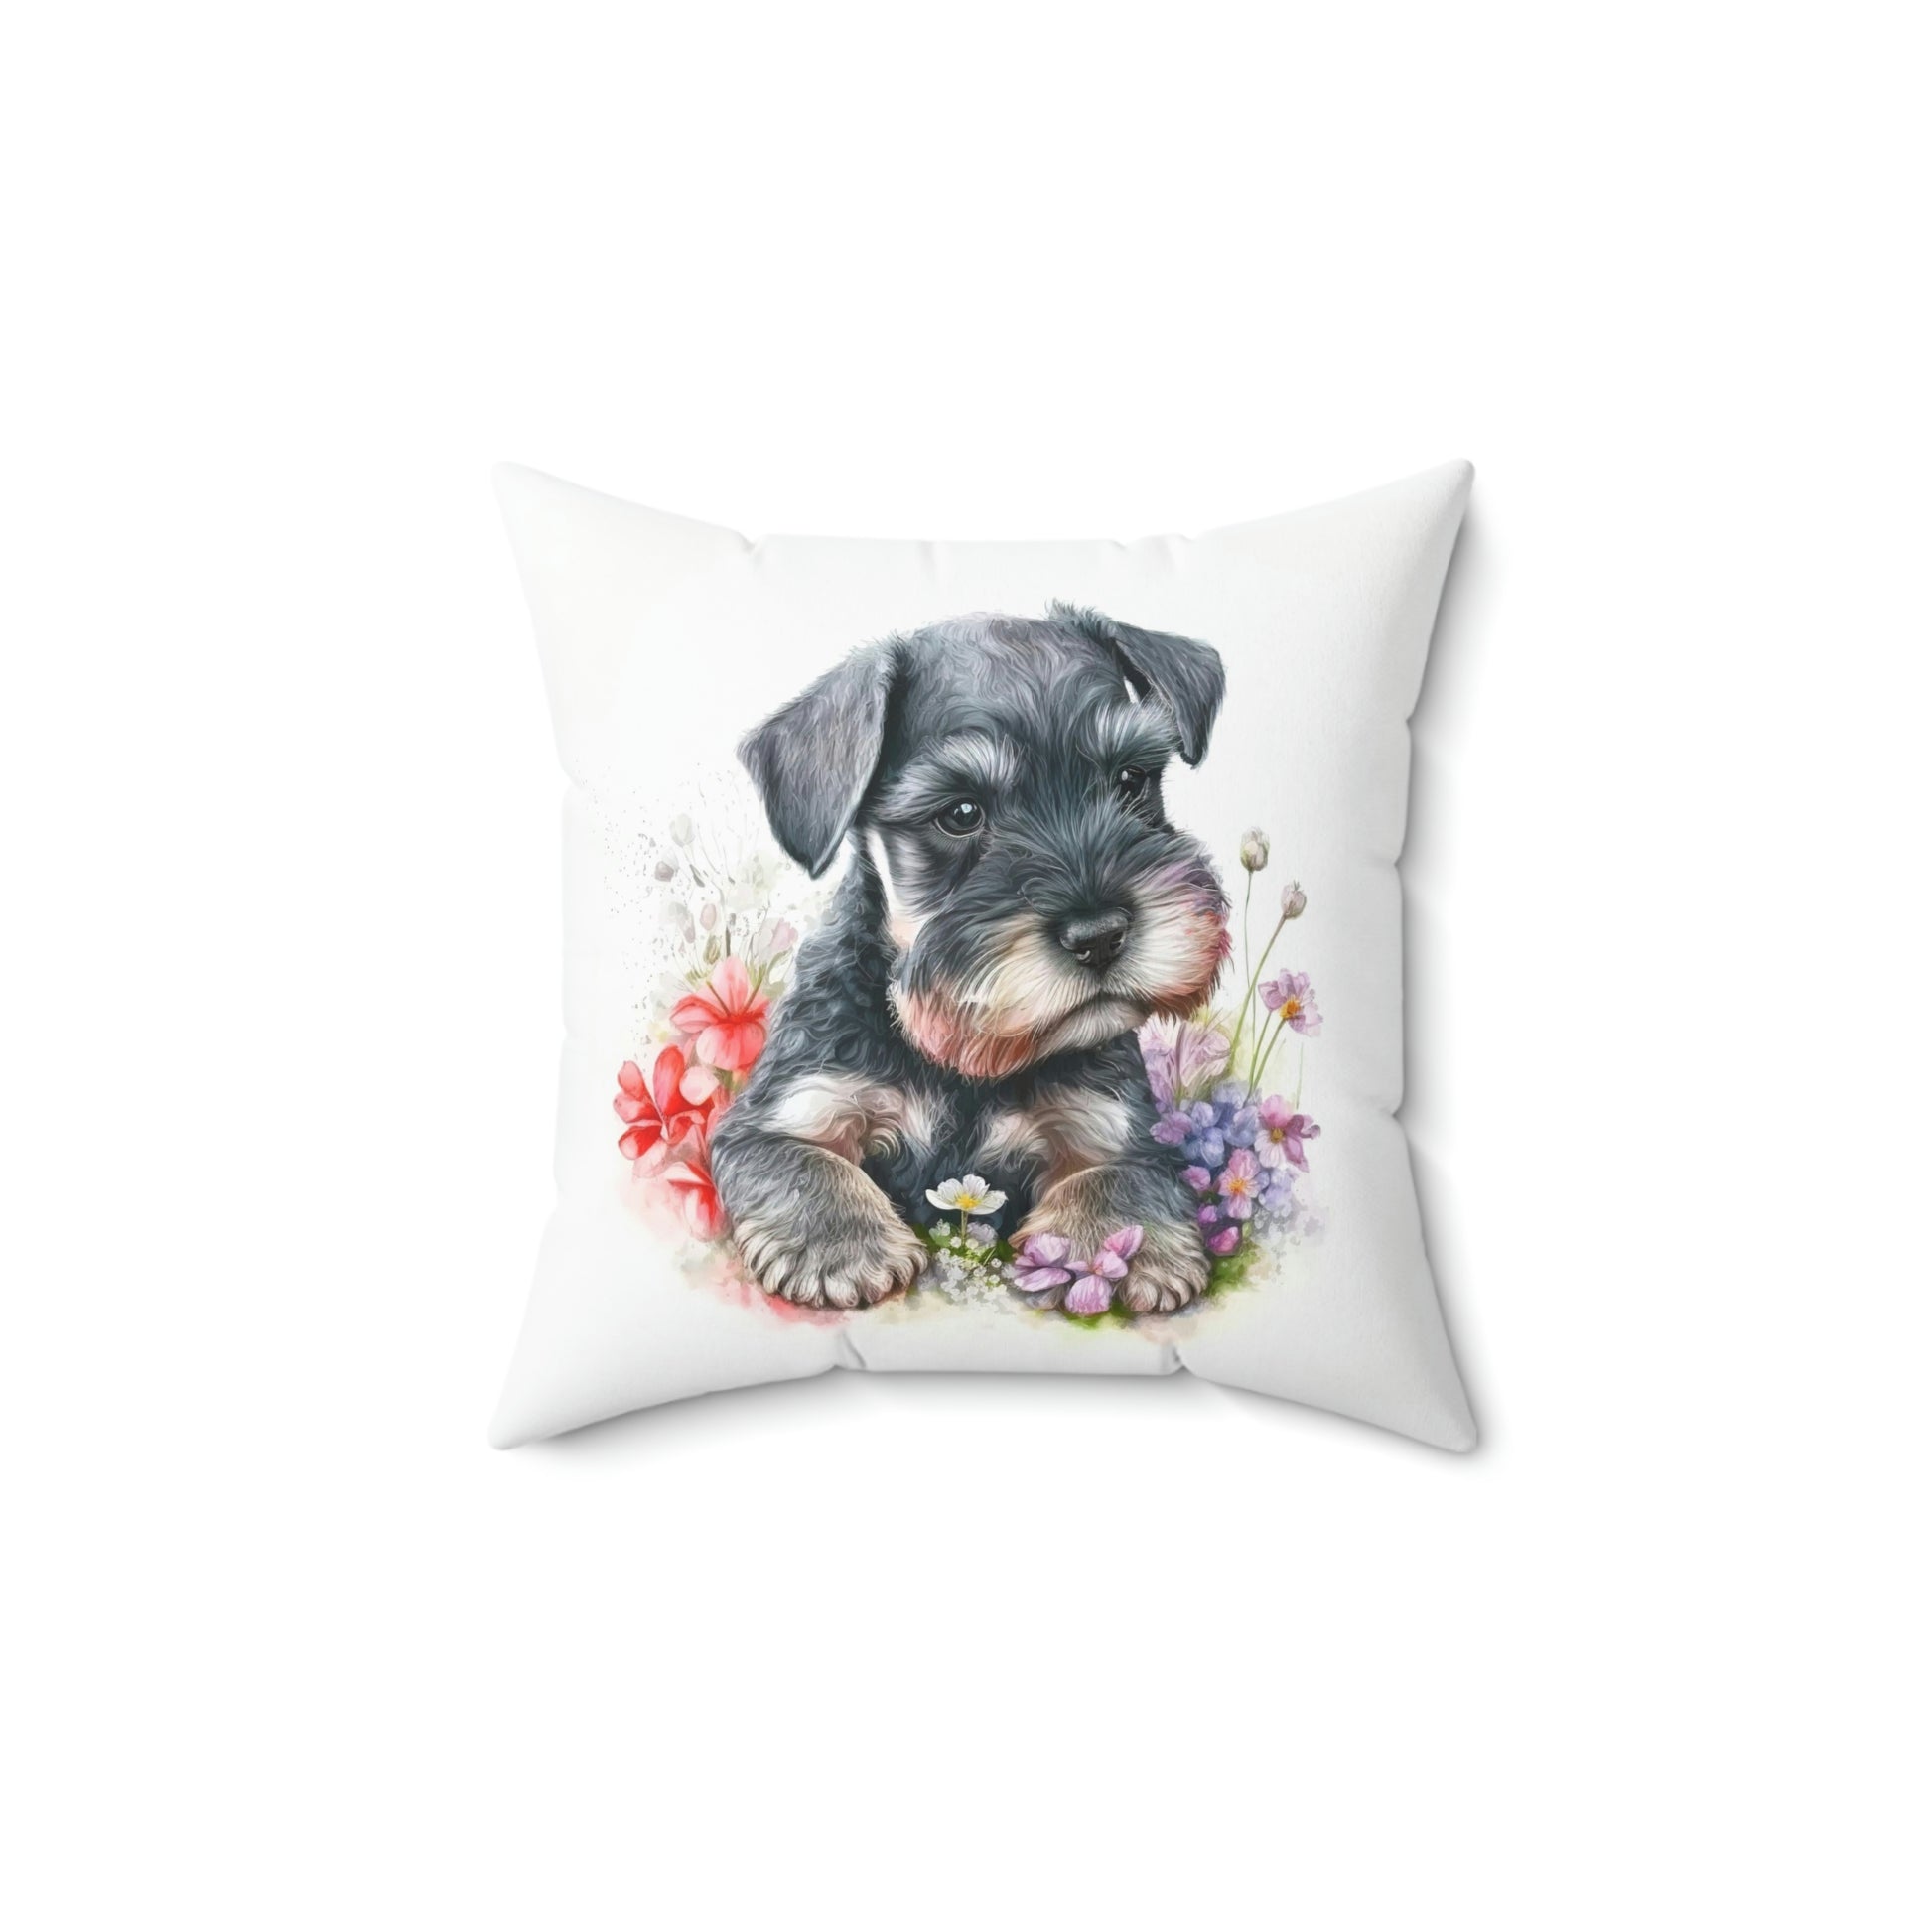 schnauzer accent throw pillow on a chair, schnauzer puppy pillow on a couch, square miniature schnauzer throw pillow on a sofa, mini schnauzer dog pillow on a lounger